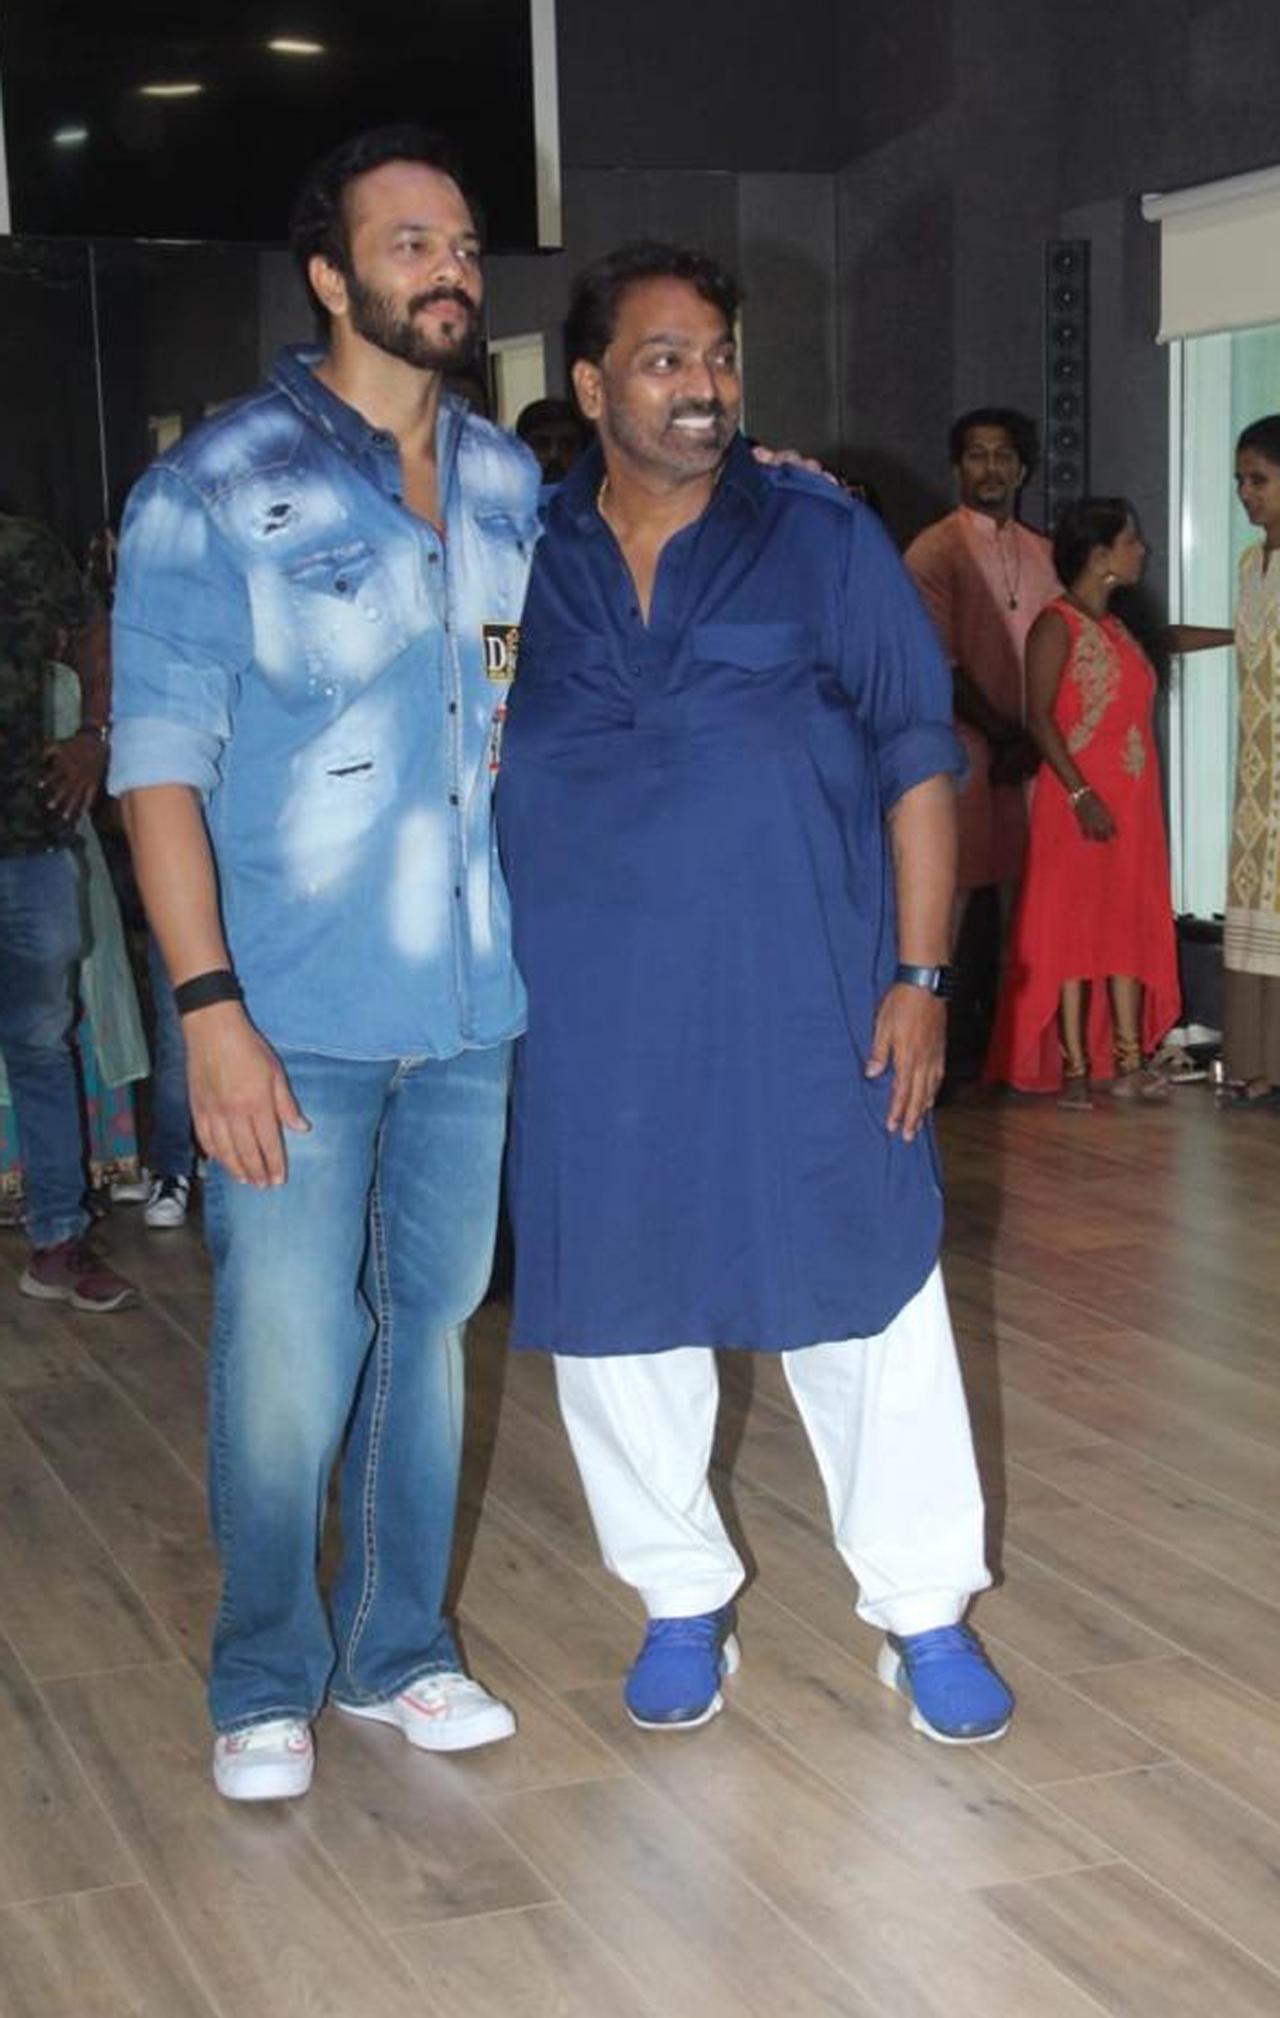 Director and producer Rohit Shetty also graced the opening of the dance studio. Shetty too has repeatedly collaborated with Ganesh Acharya on films like the Singham series, Simmba, Sooryavanshi or the Golmaal franchise.